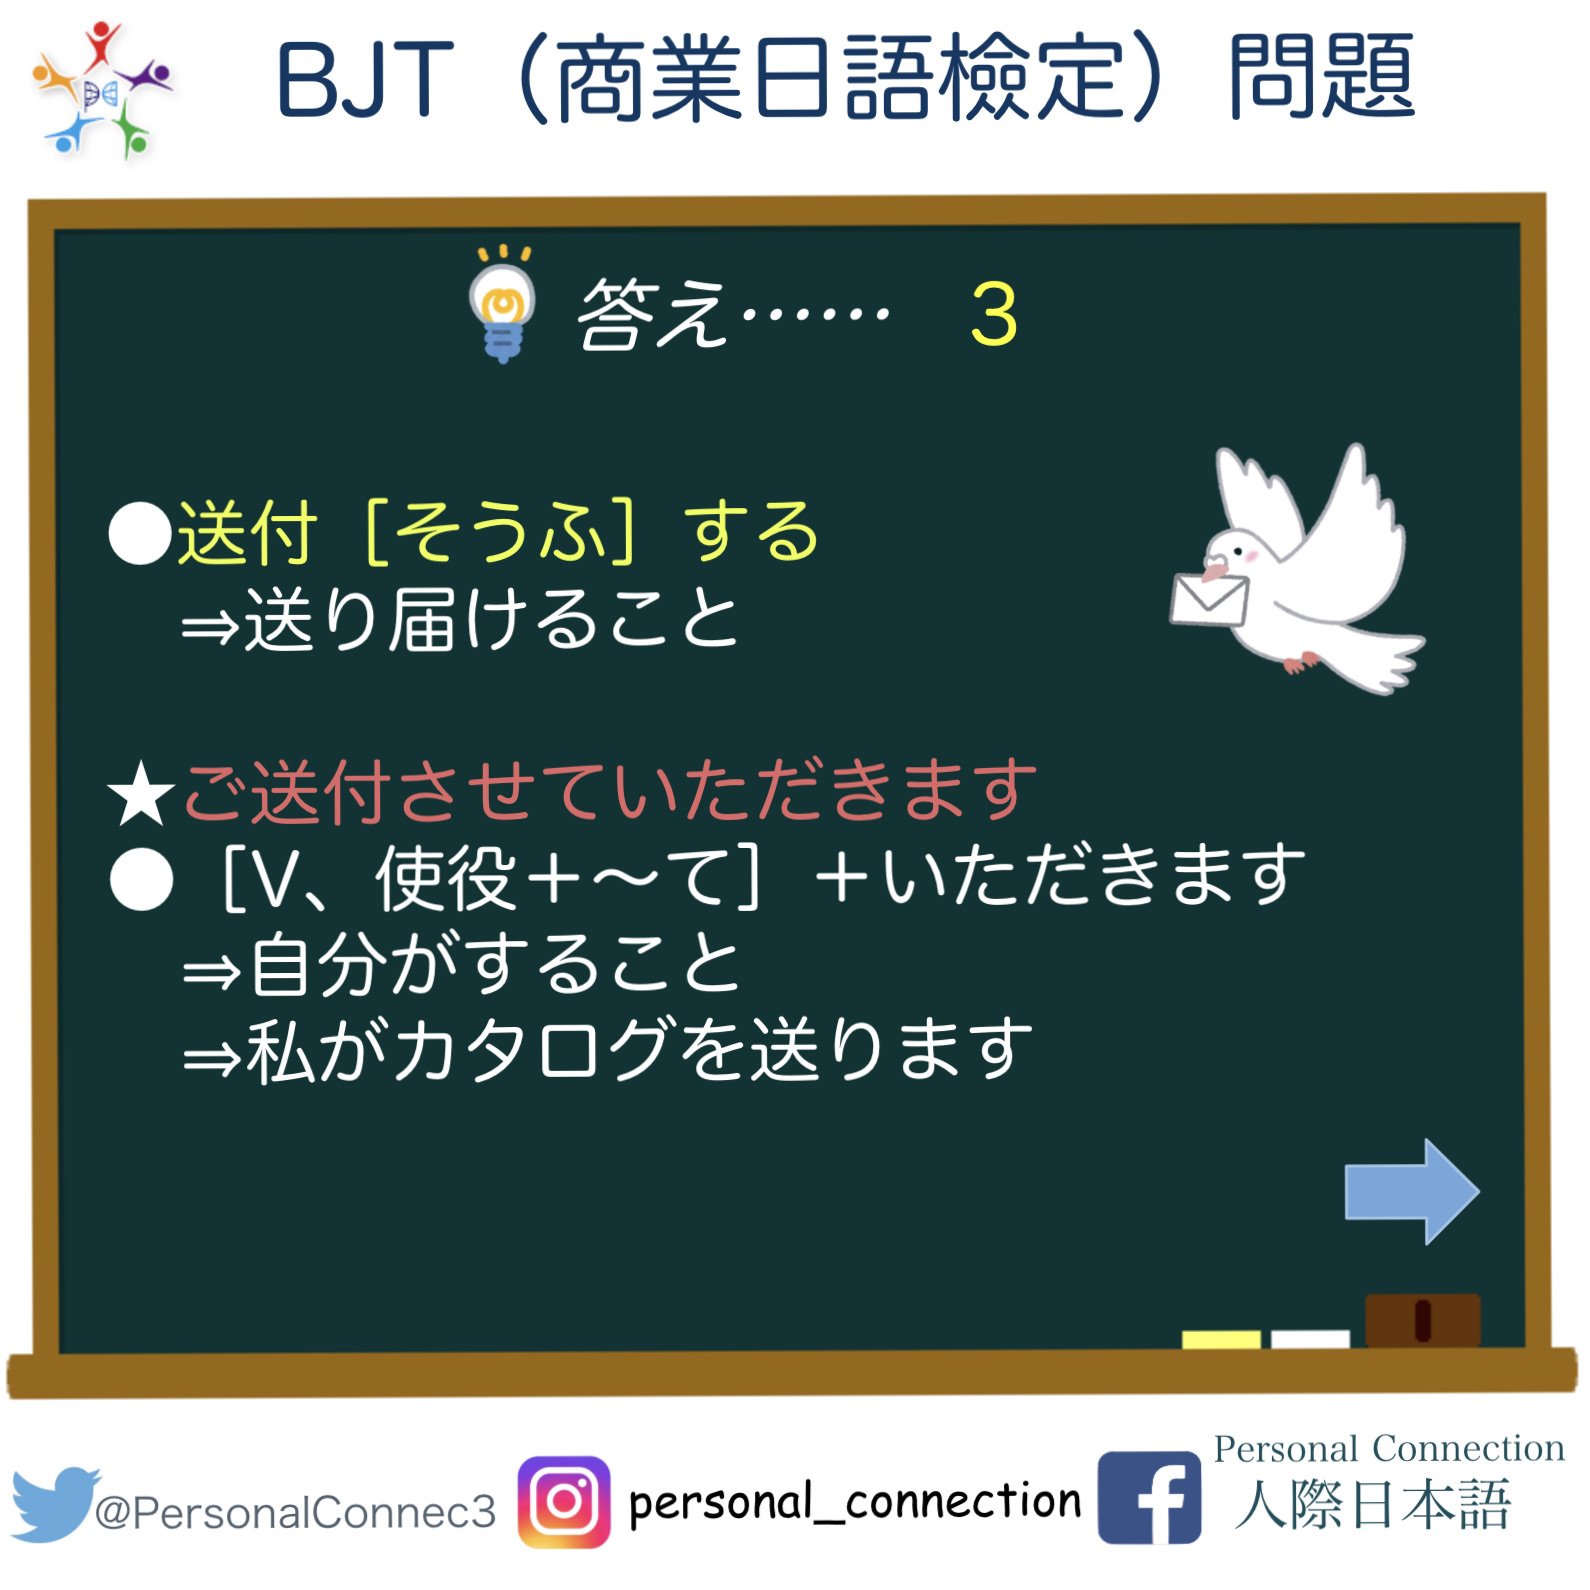 Personal Connection 人際日本語 Personalconnec3 Twitter